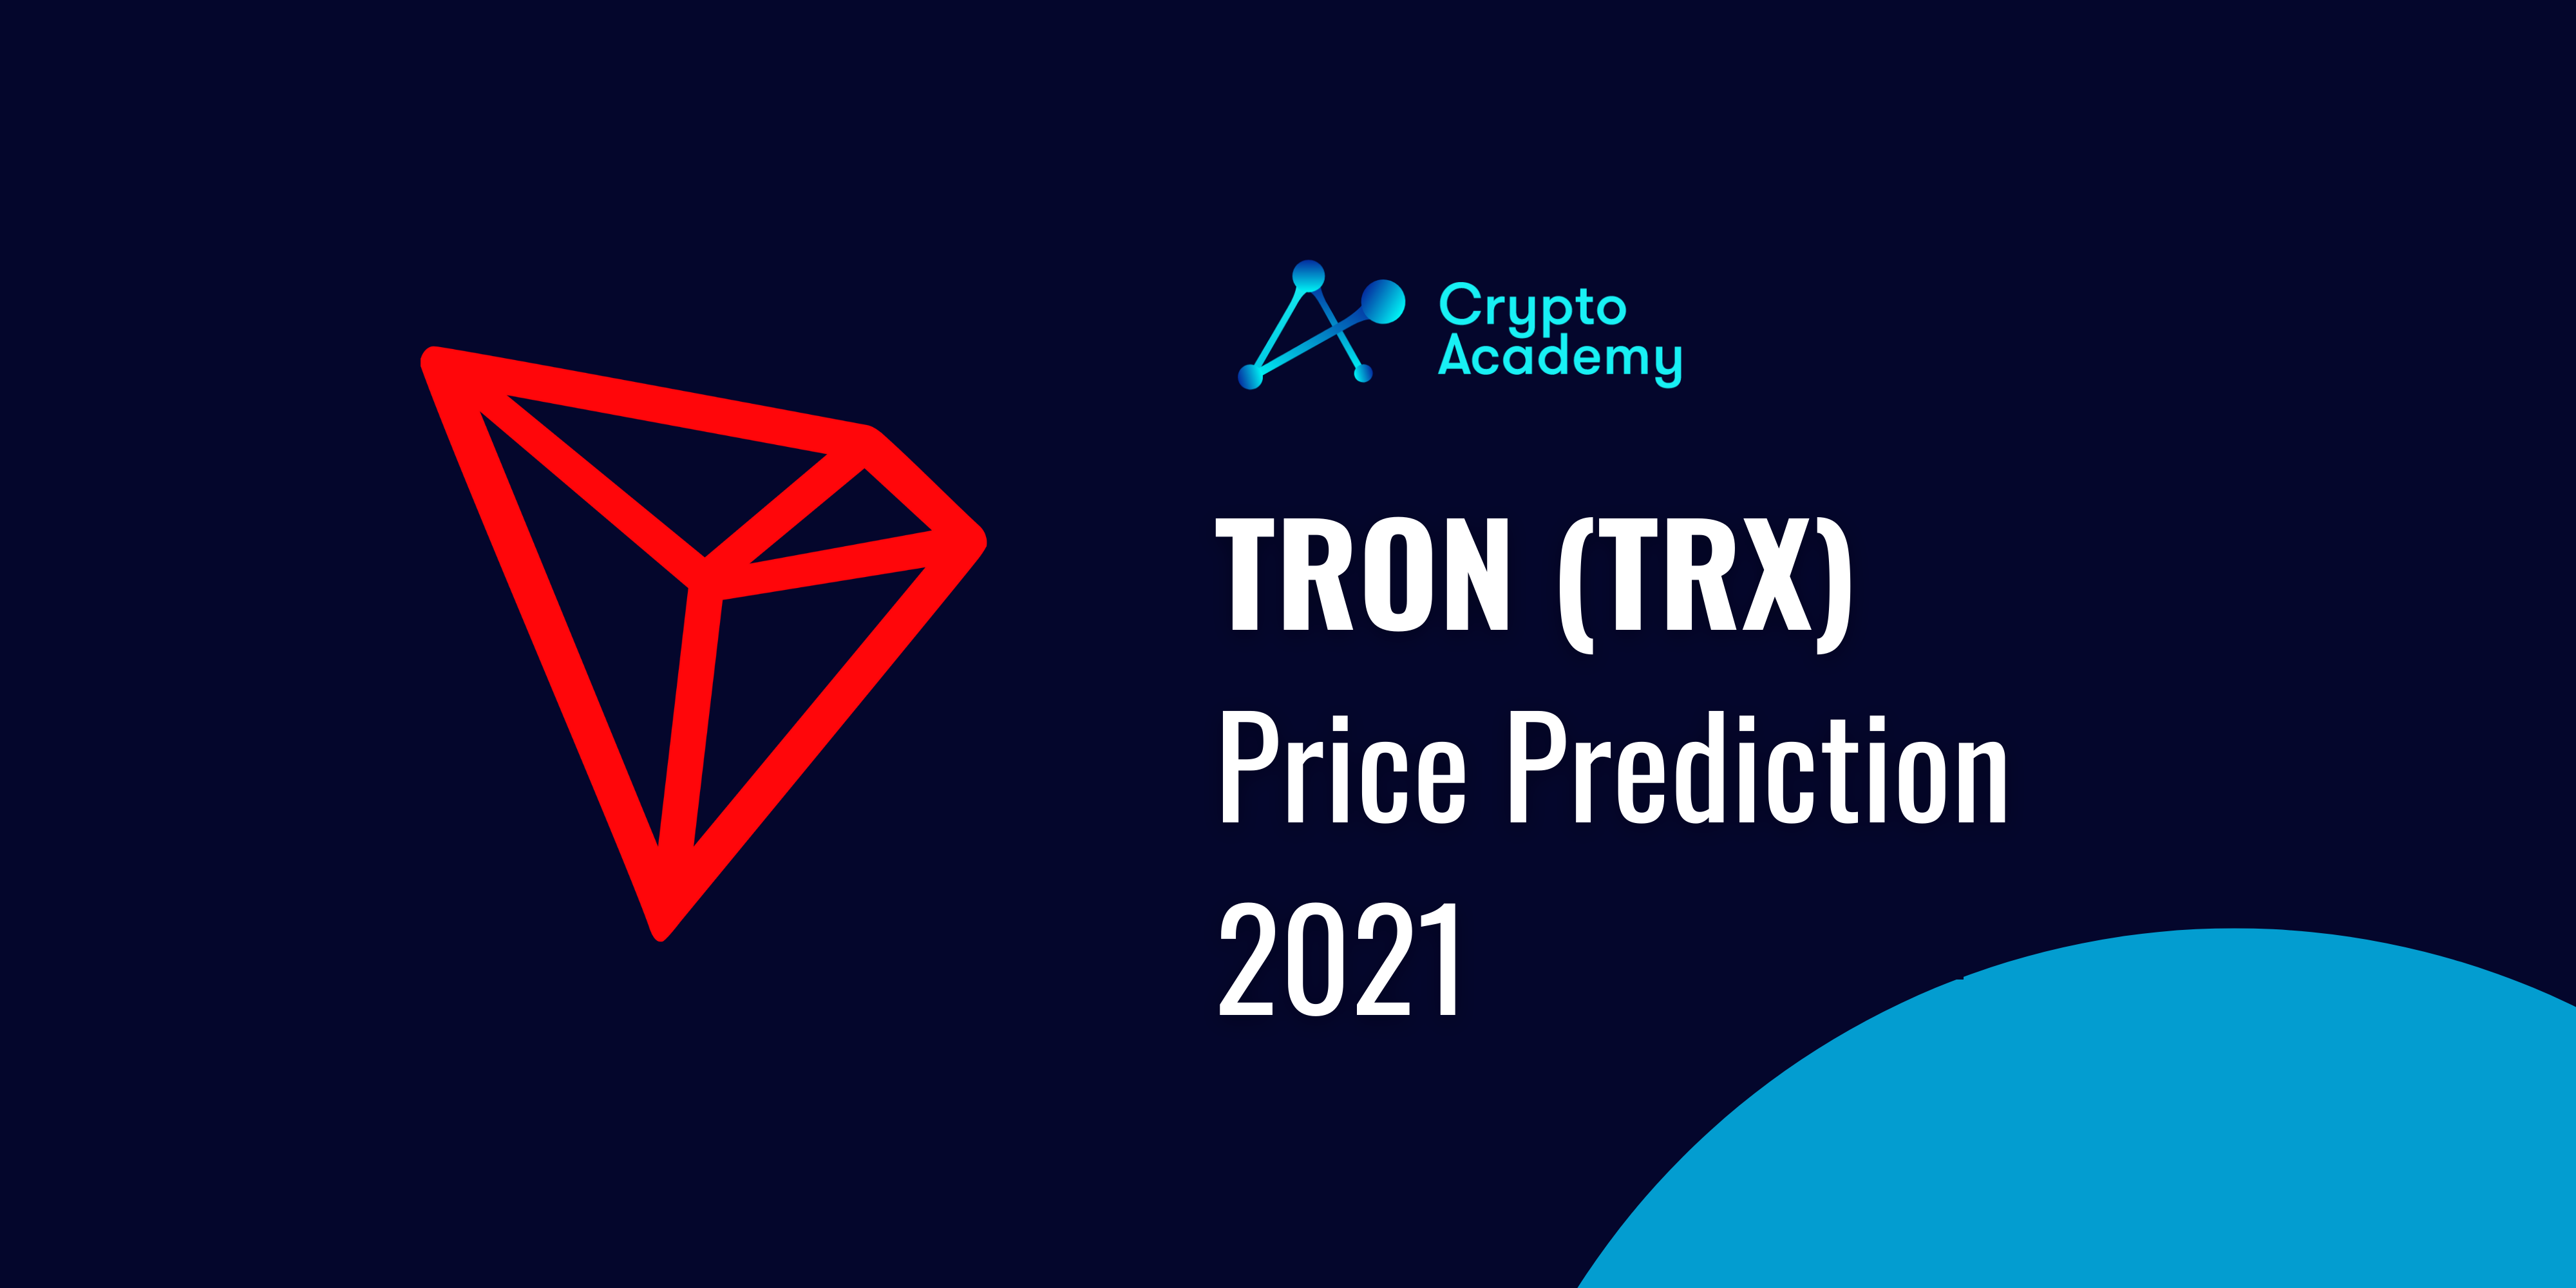 TRON Price Prediction 2021 and for the Next 5 Years – Will TRX Reach $1?